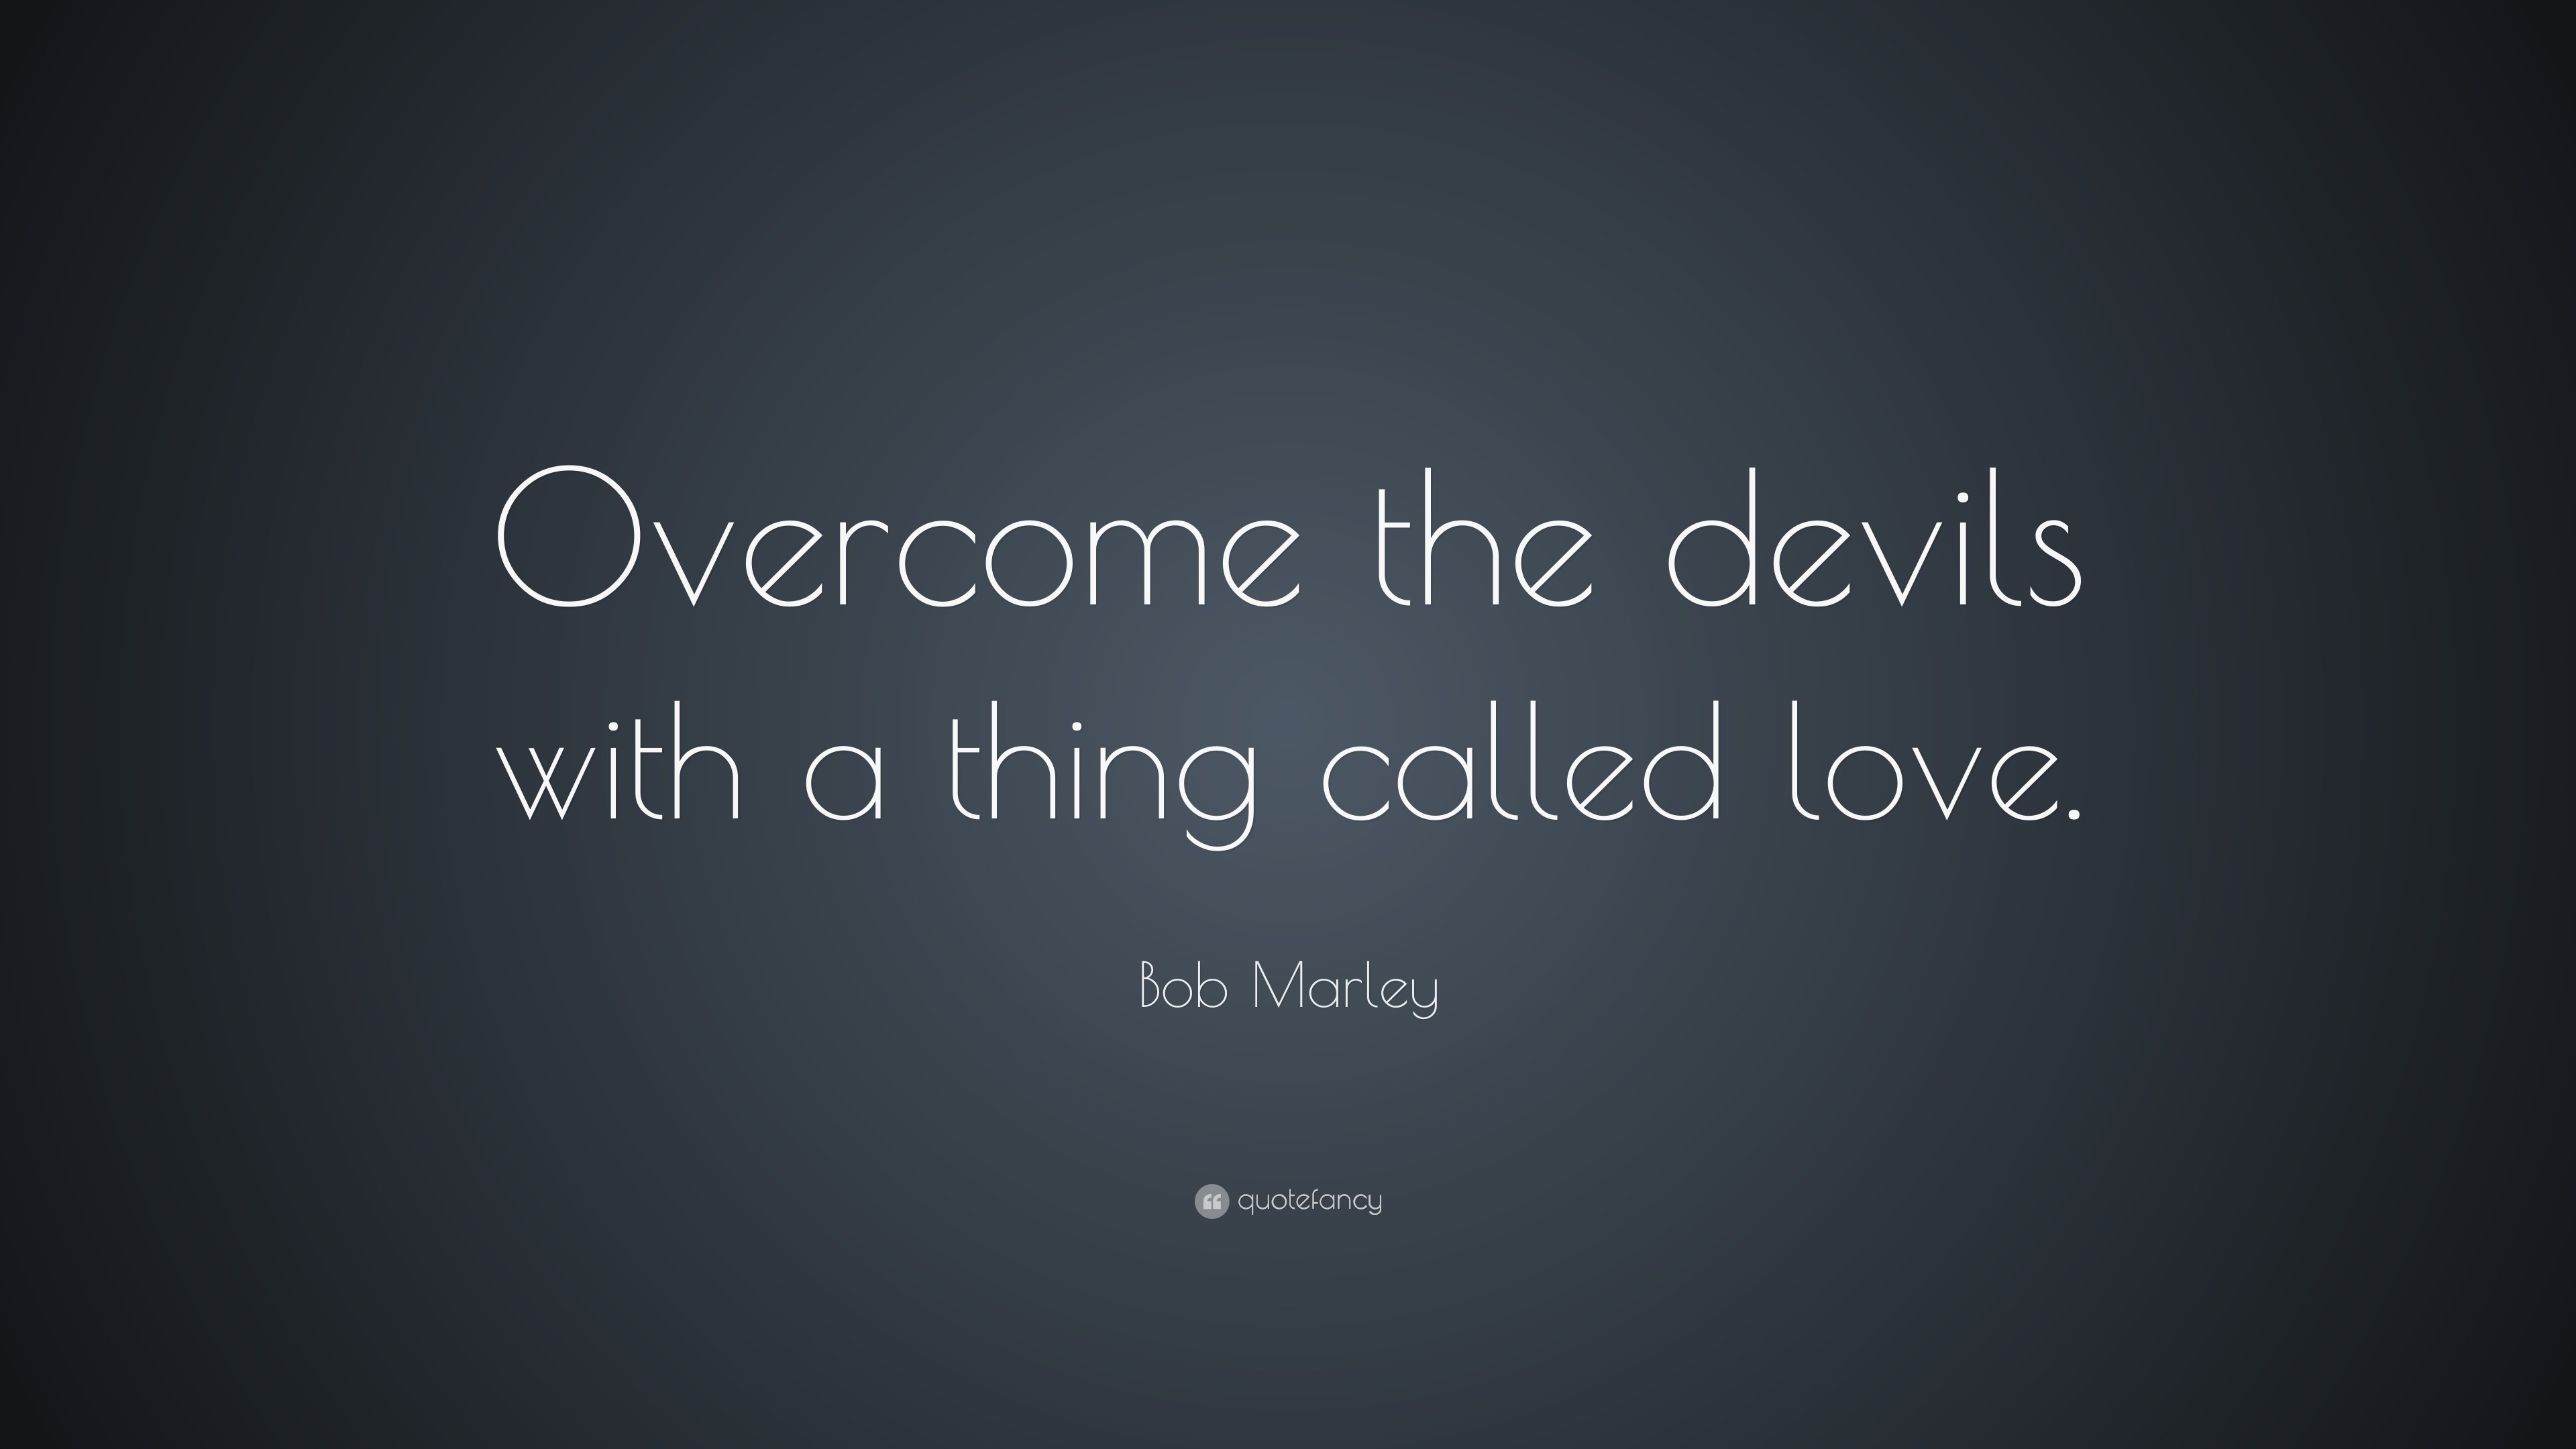 Bob Marley Quote “Over e the devils with a thing called love ”